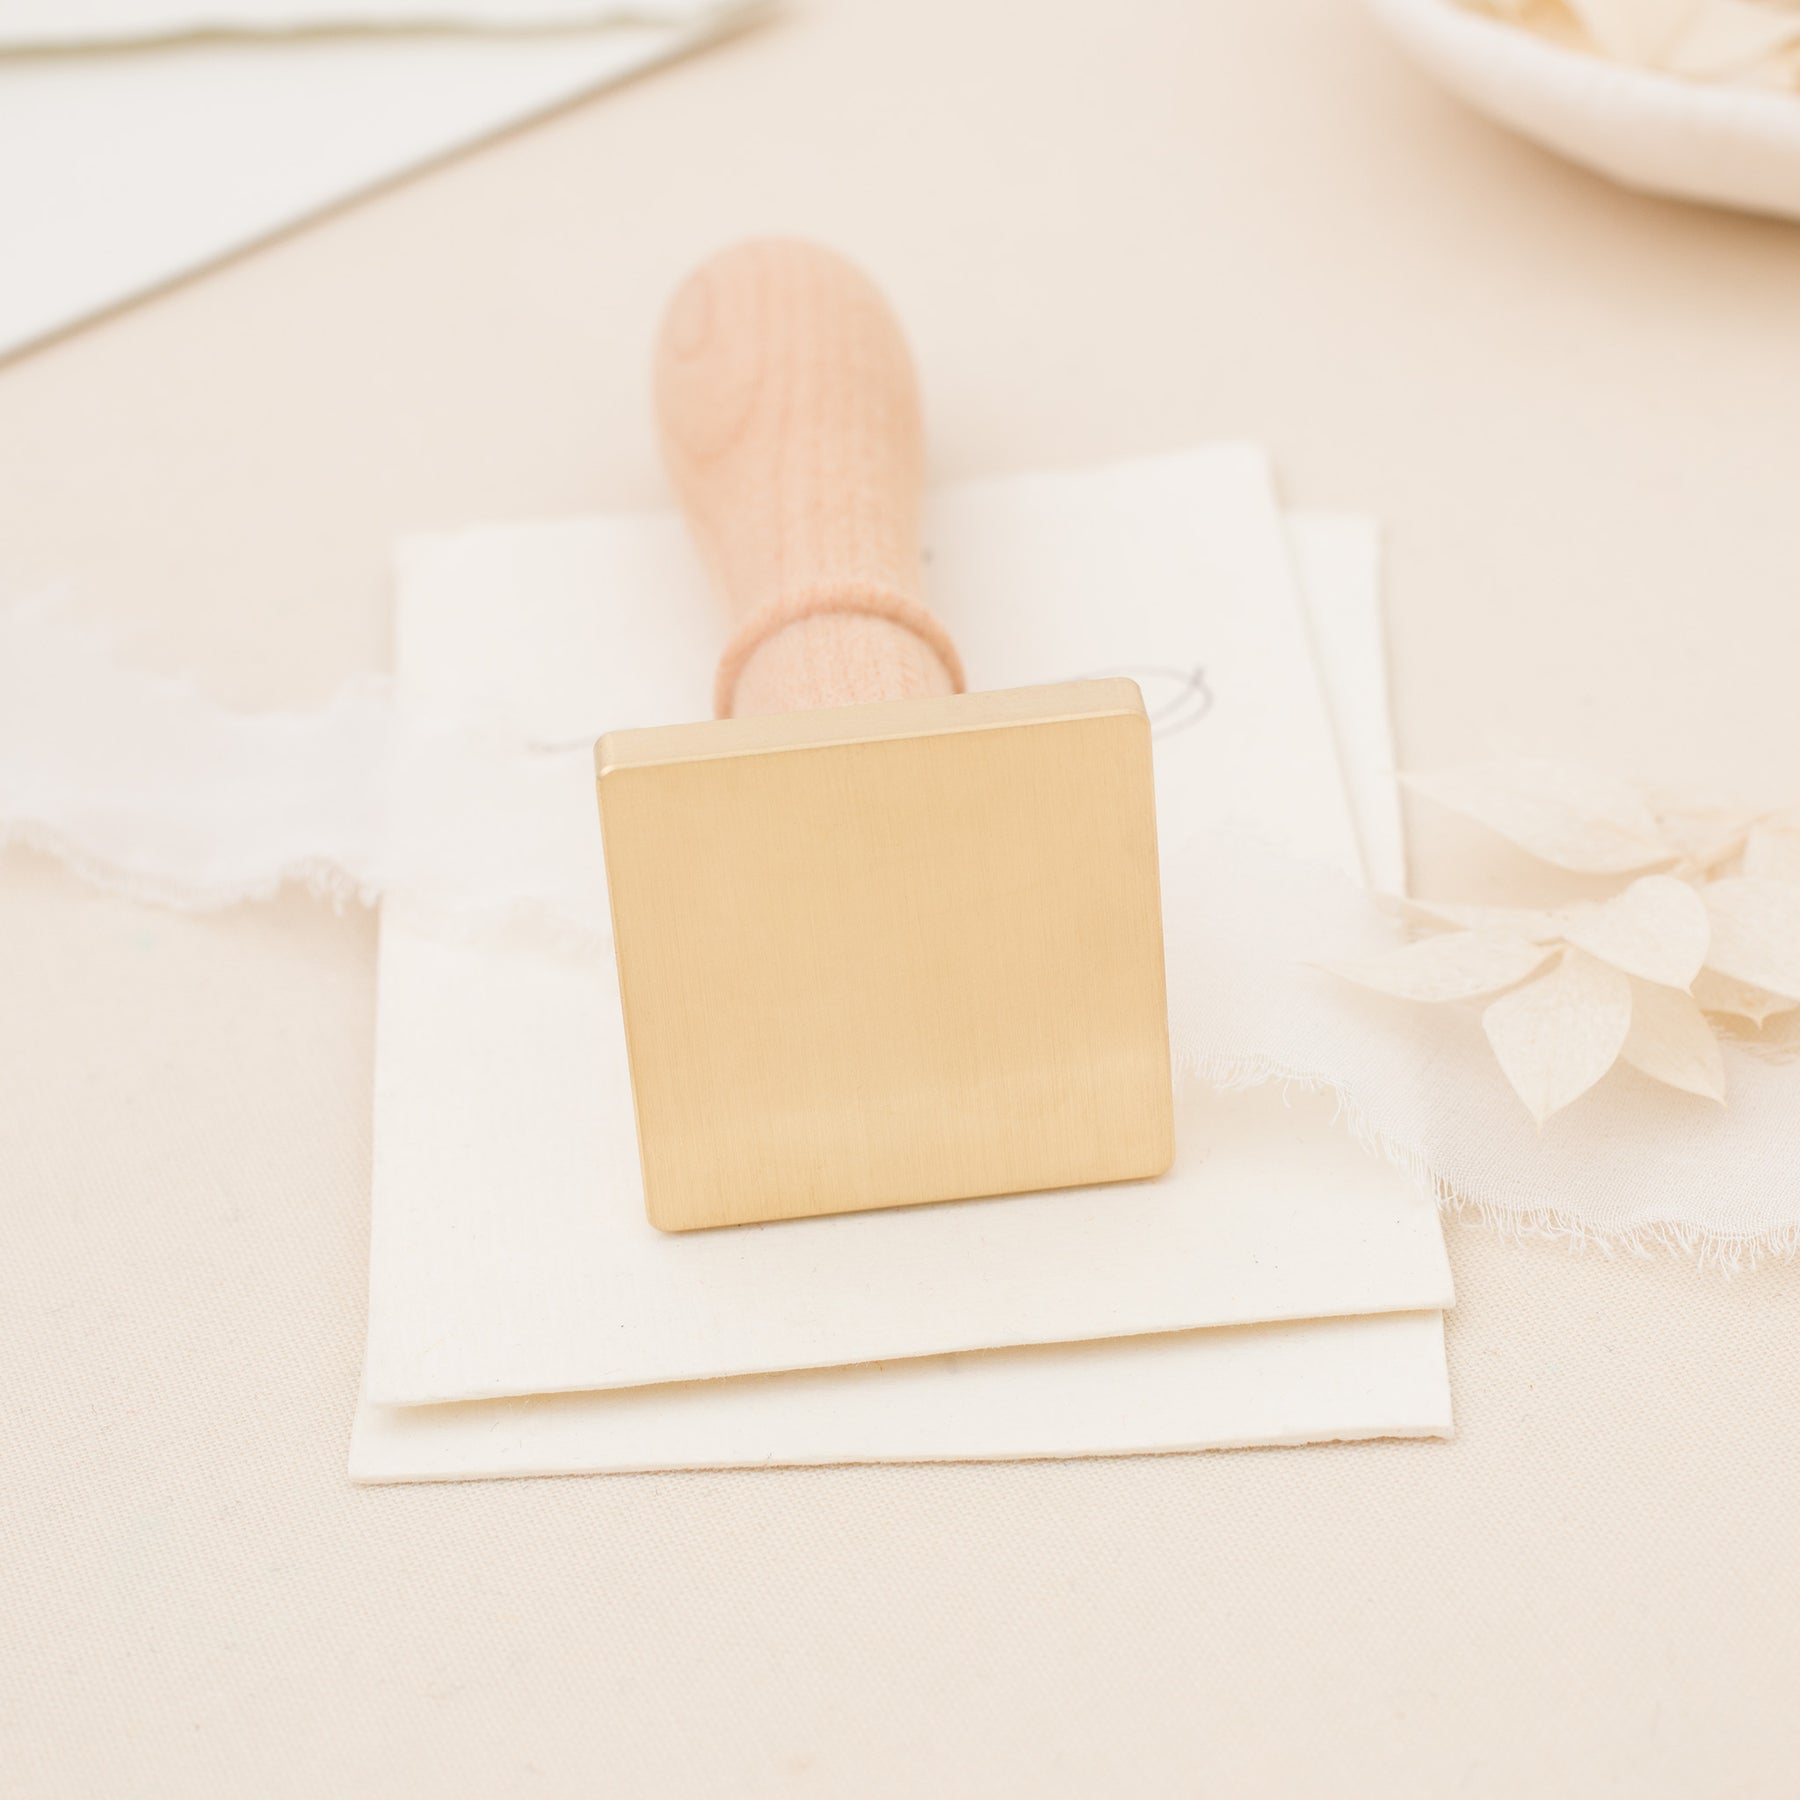 Design Your Own Wax Stamp